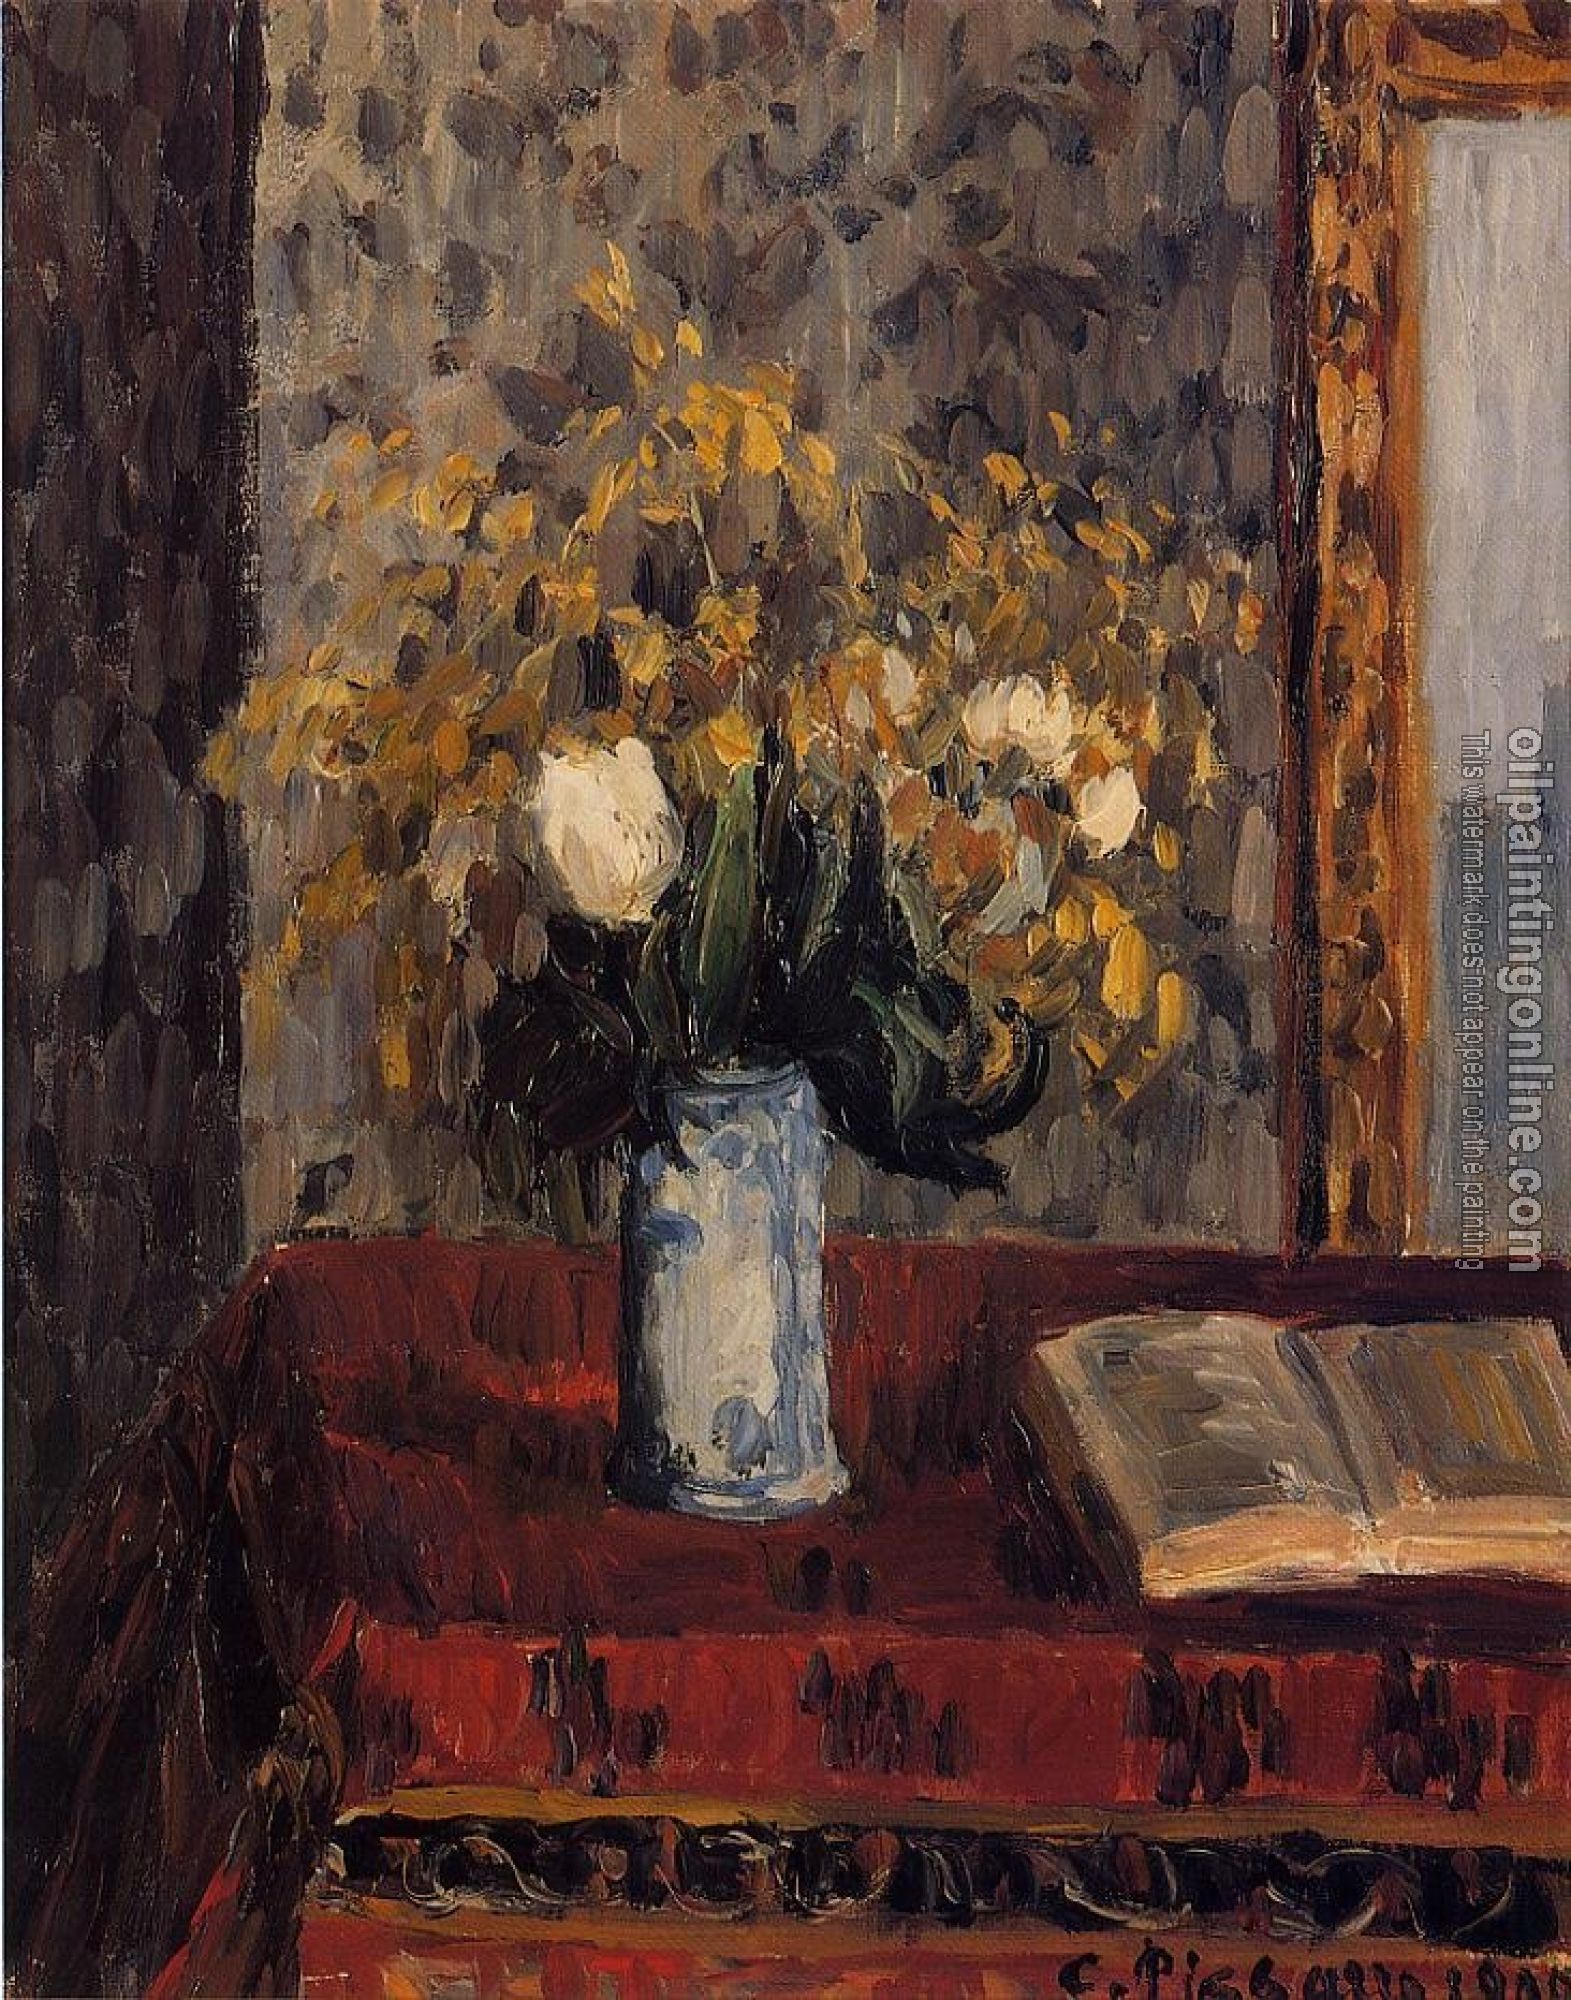 Pissarro, Camille - Vase of Flowers, Tulips and Garnets